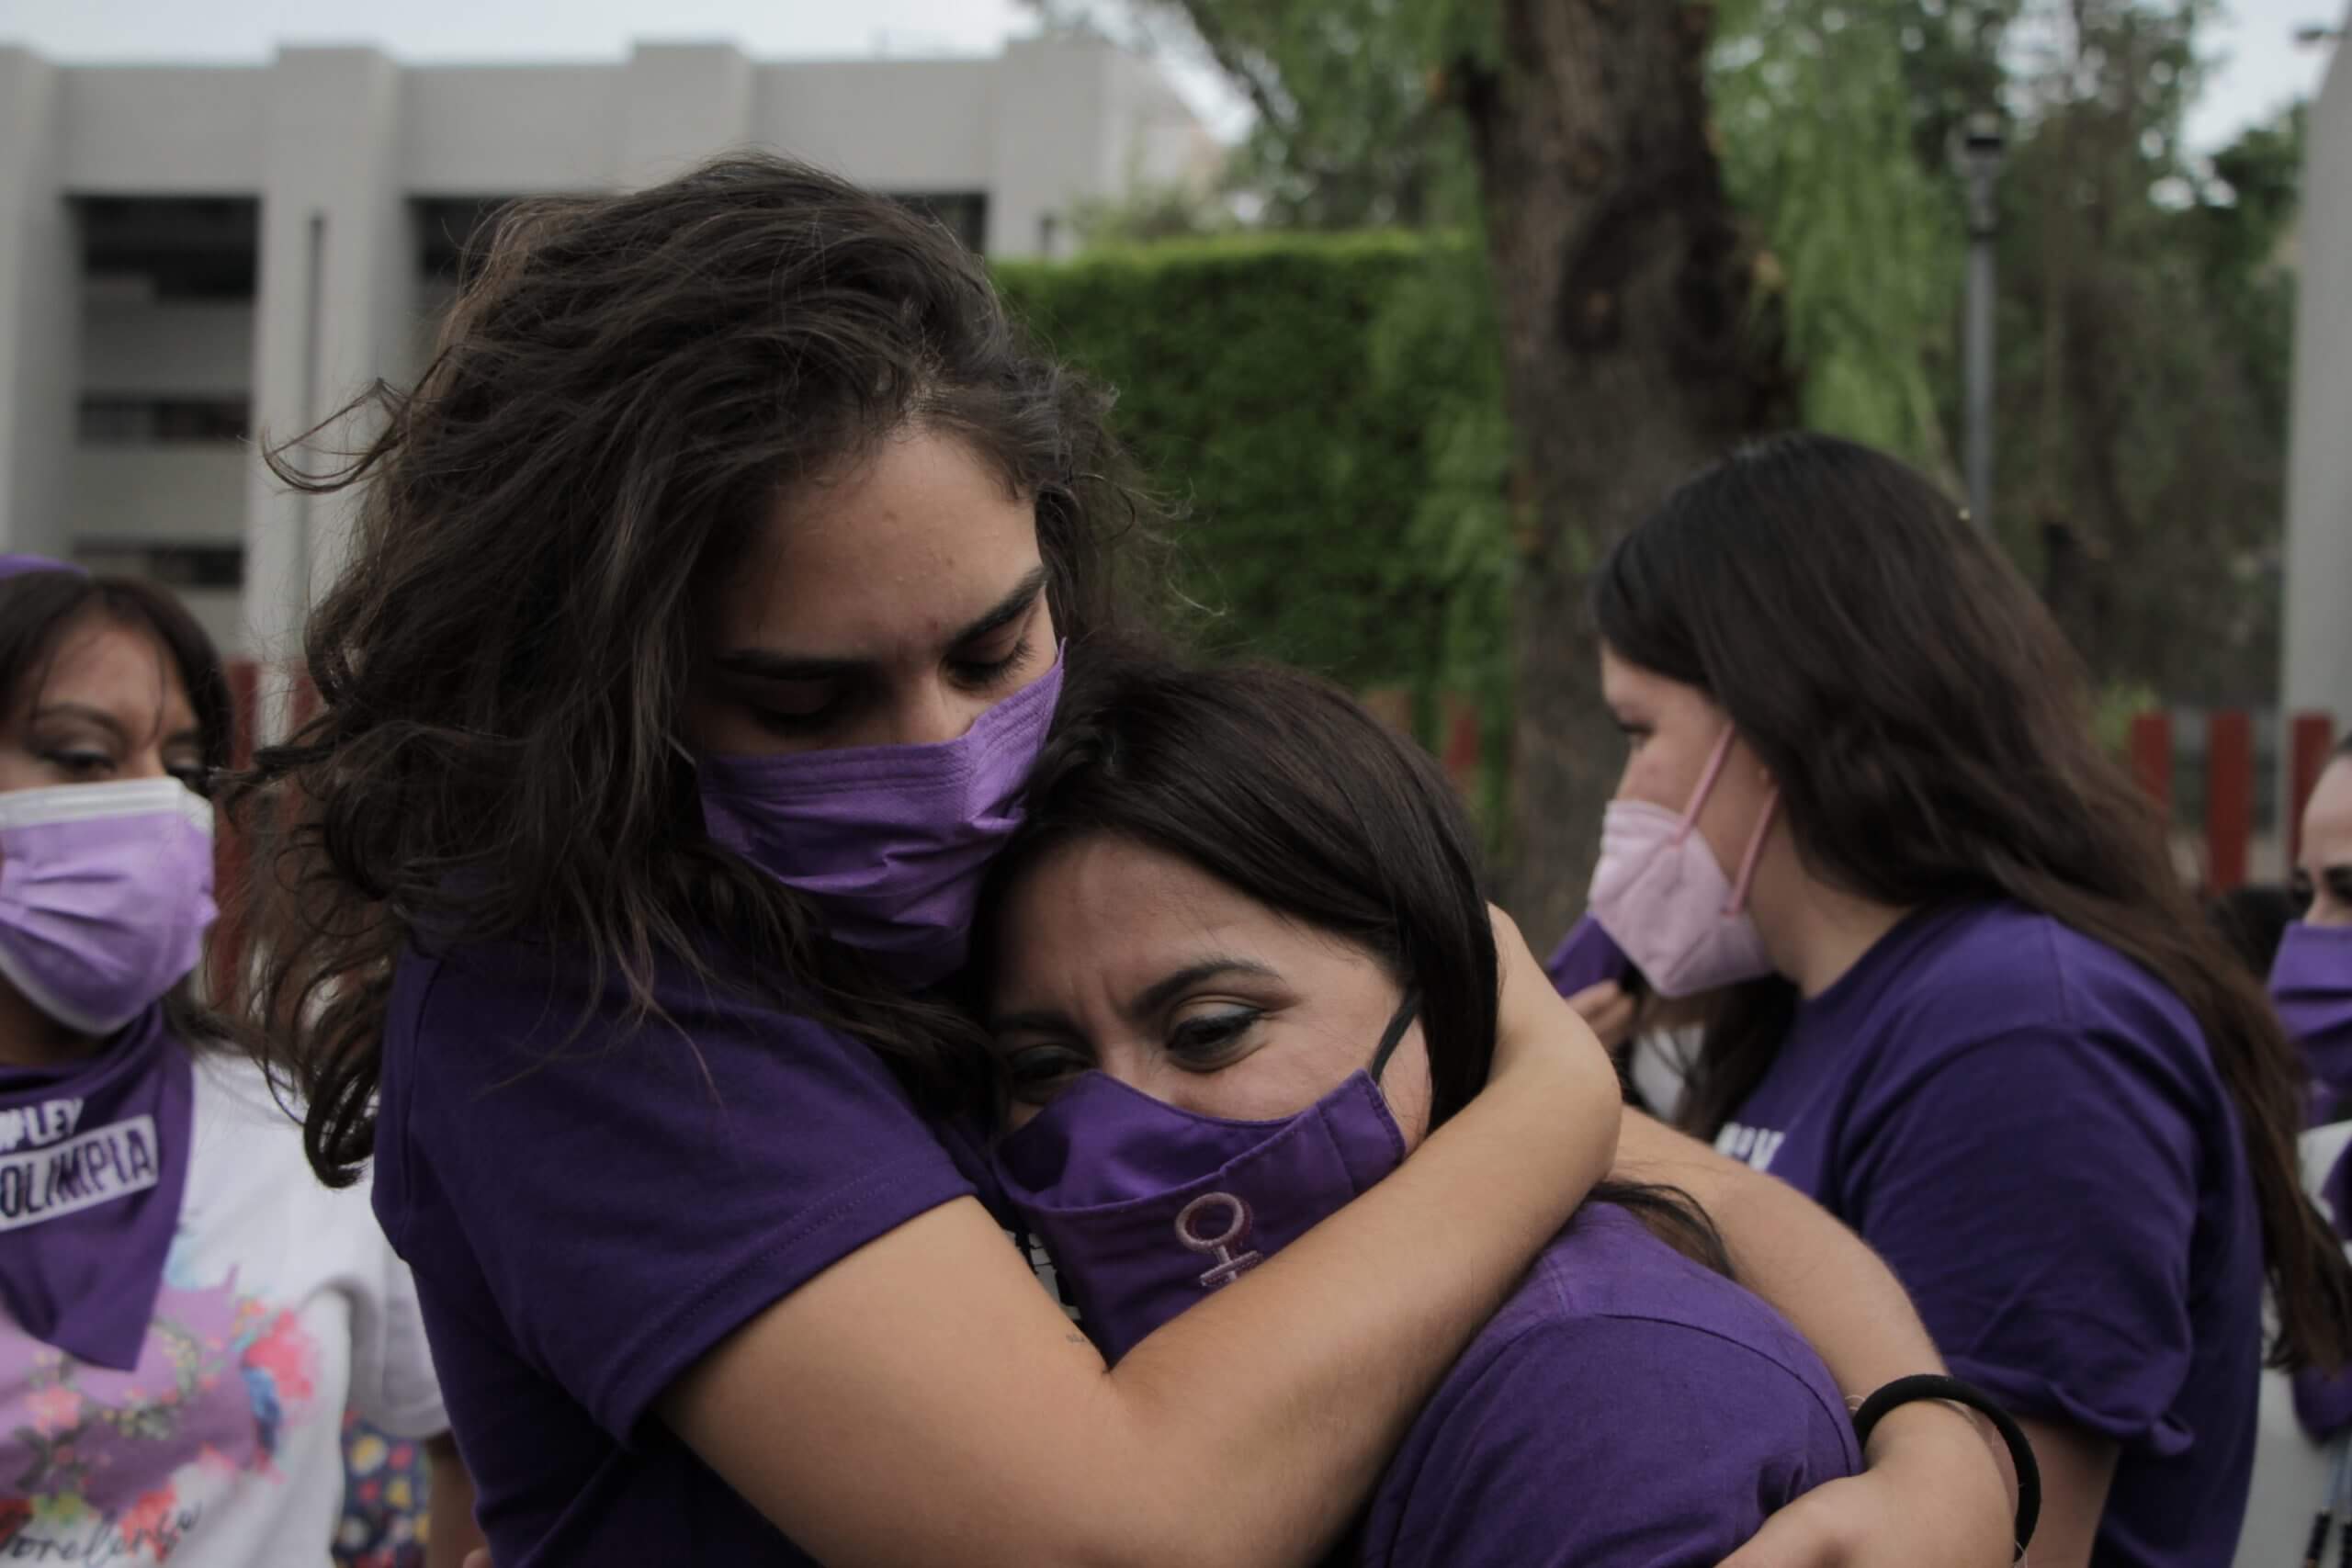 Director Indira Cato and Olimpia Coral hugging each other after the Olimpia Law's approval at the Mexico City Chamber of Deputies in 2021.